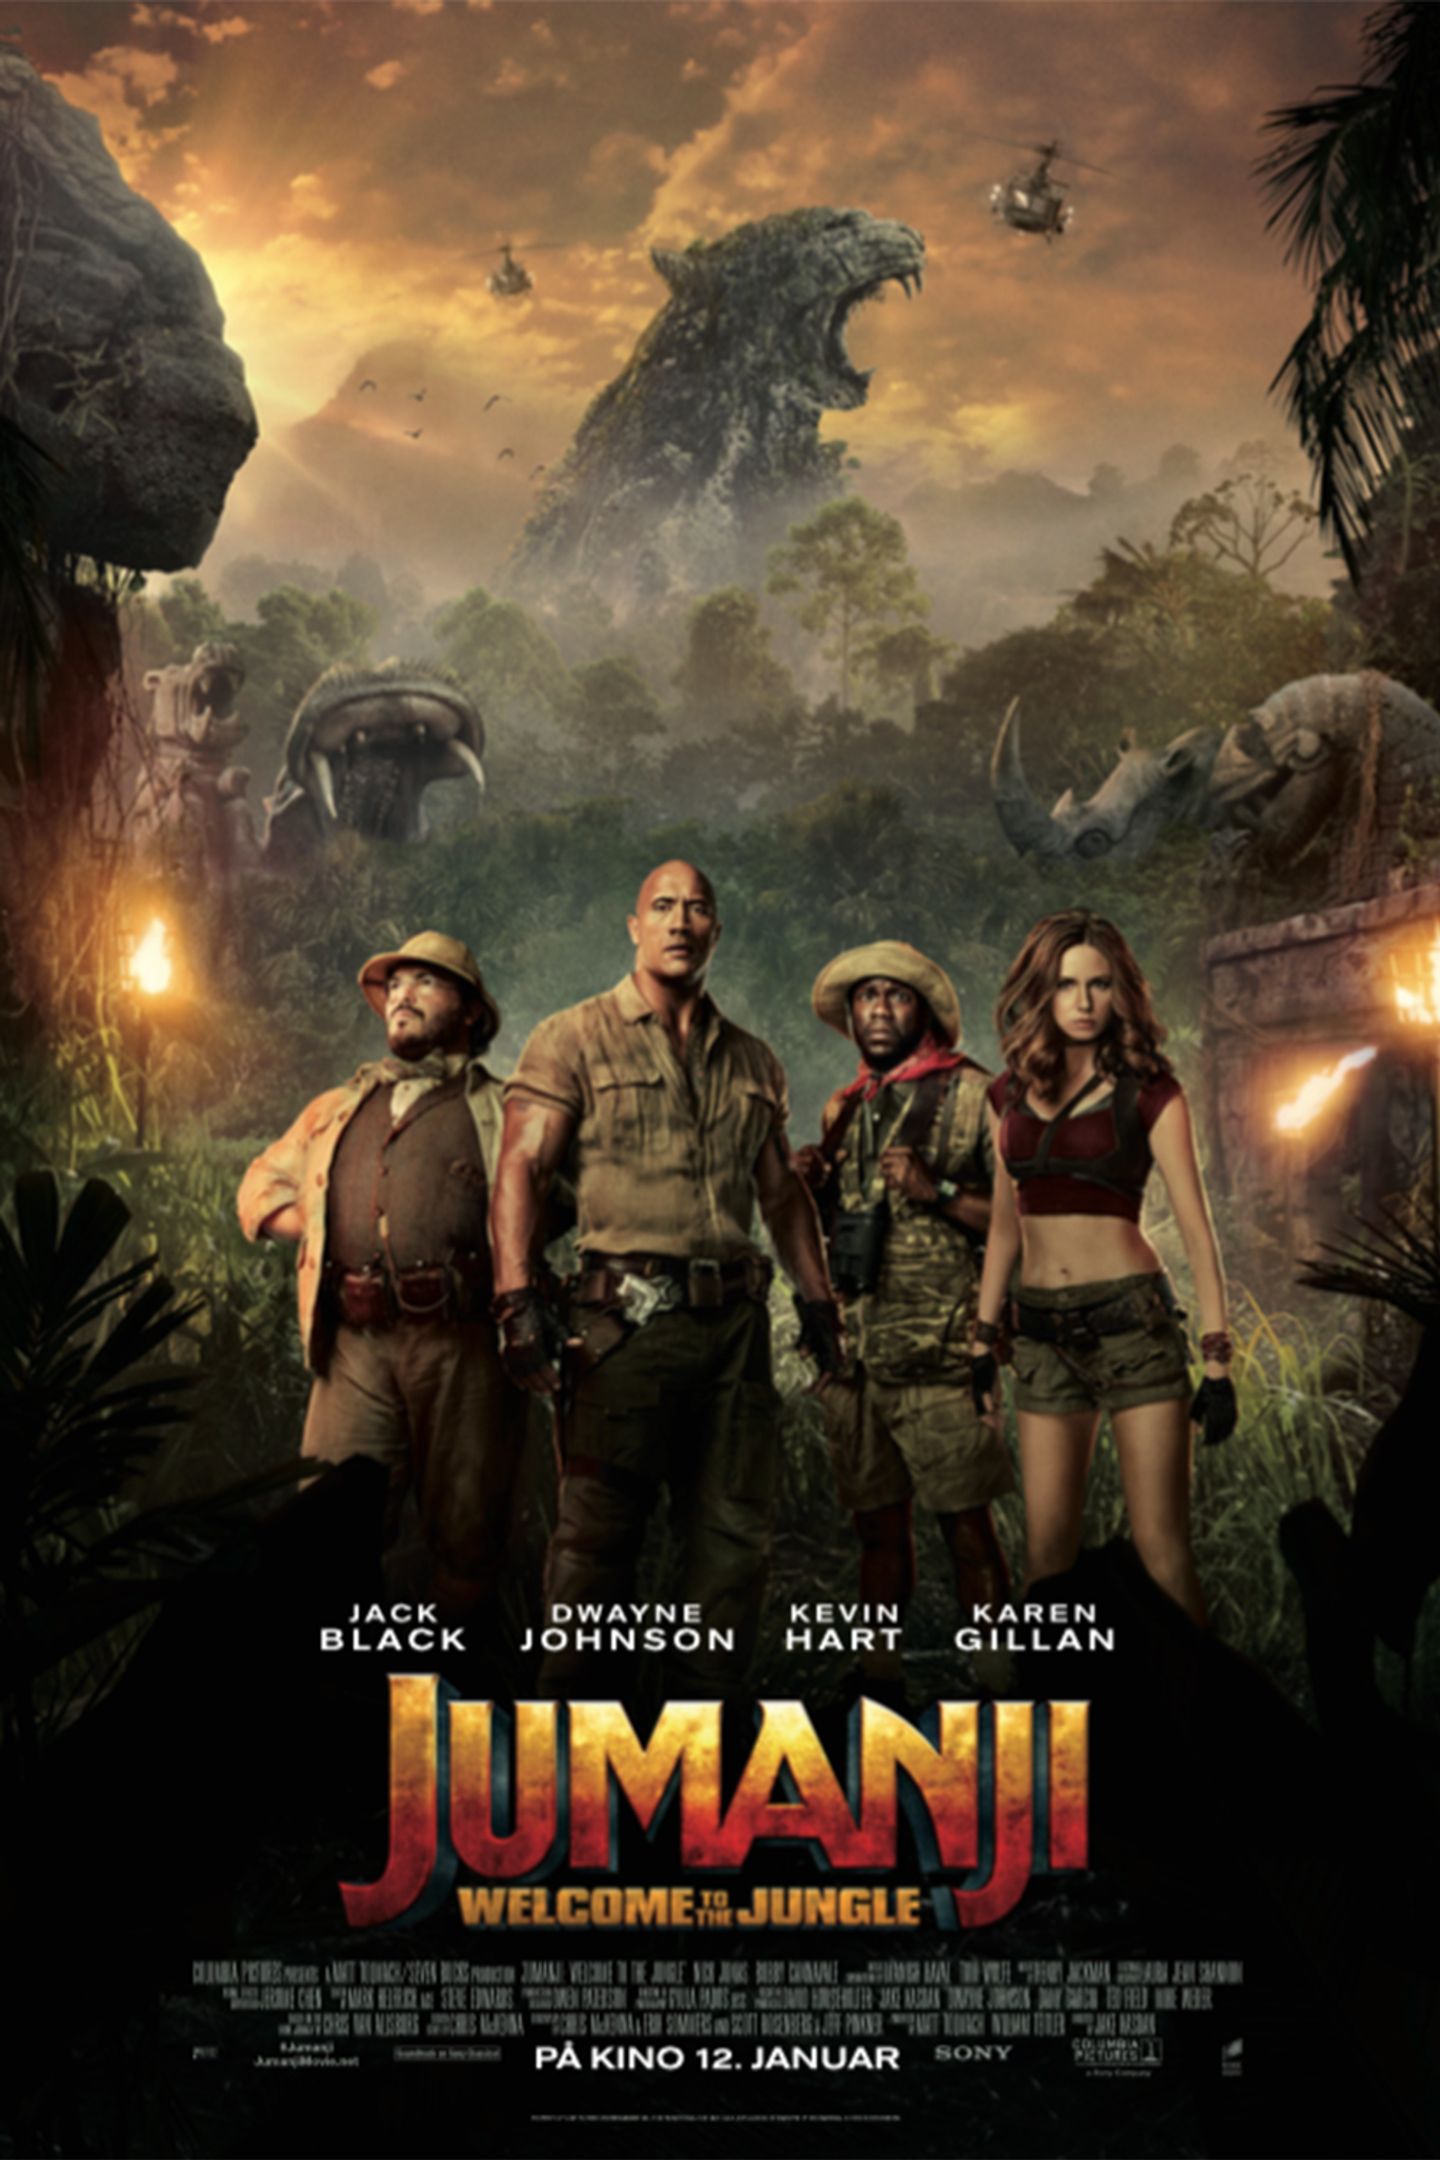 Plakat for 'Jumanji: Welcome to the Jungle (3D)'